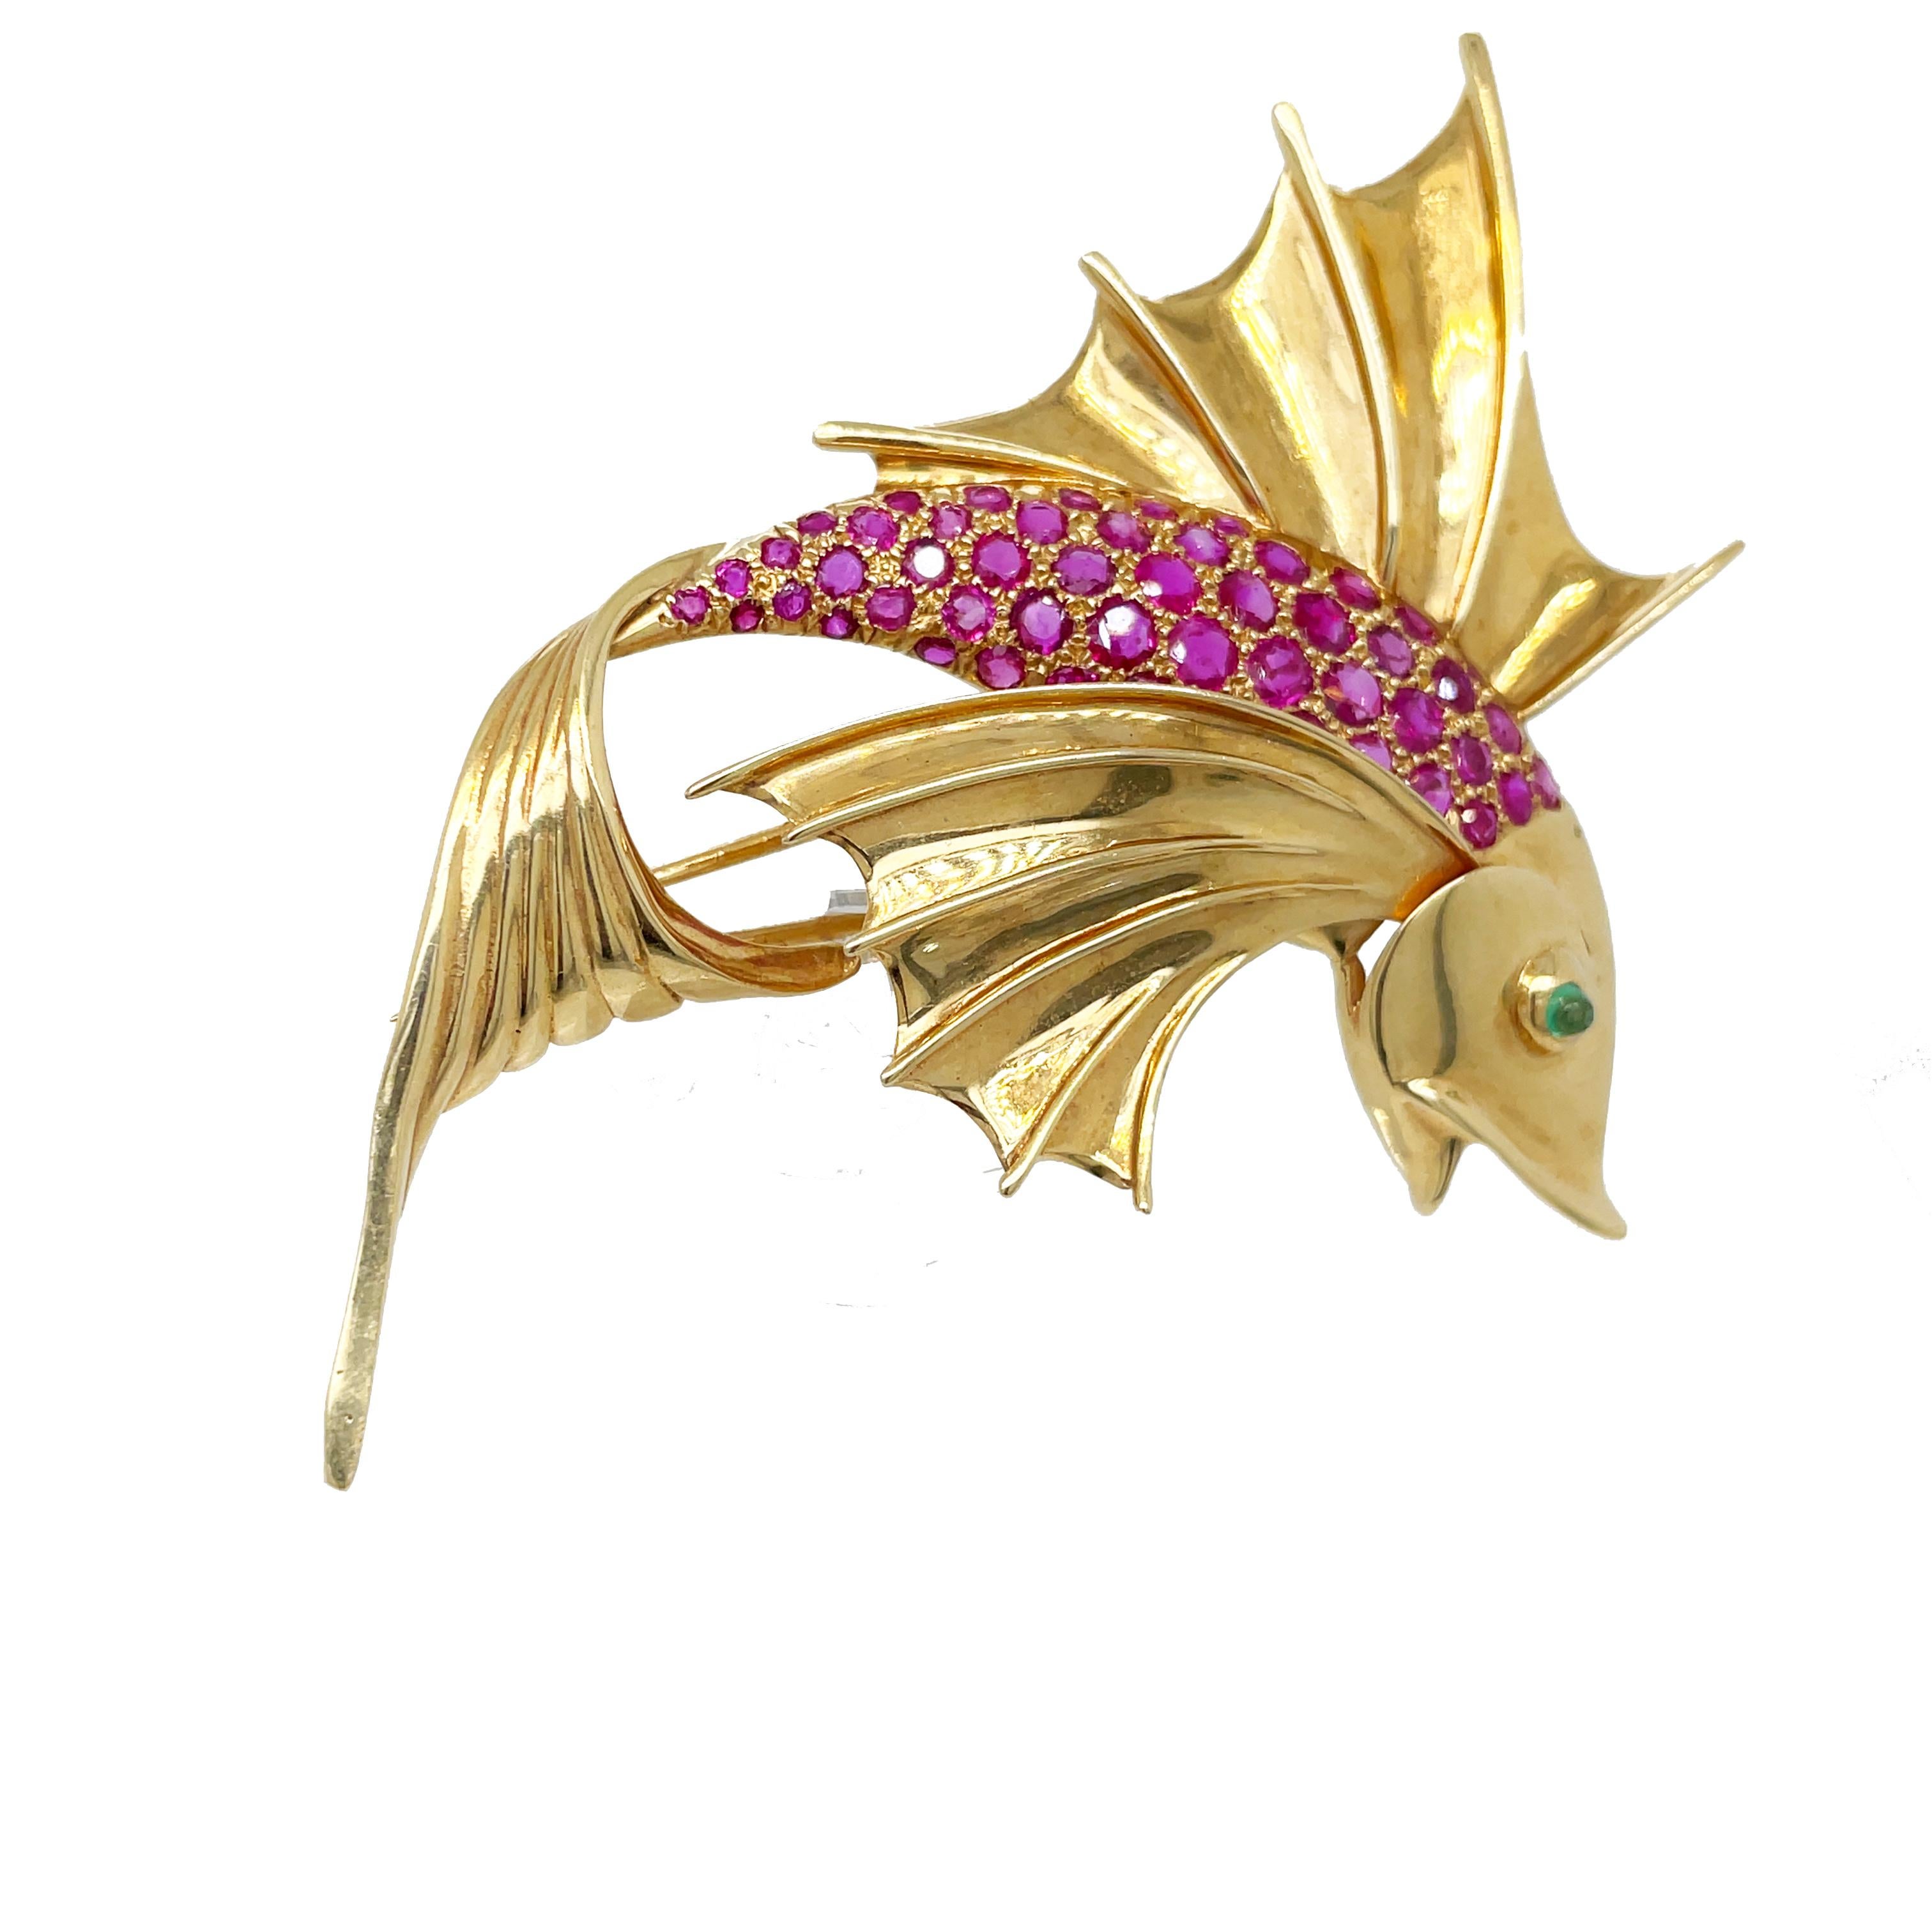 This is an absolutely show-stopping 1960s fish pin set in 14K yellow gold that features gorgeous dazzling rubies across the body and an emerald eye. The intricate detail and craftmanship of this pin are truly extraordinary. With an approximate total